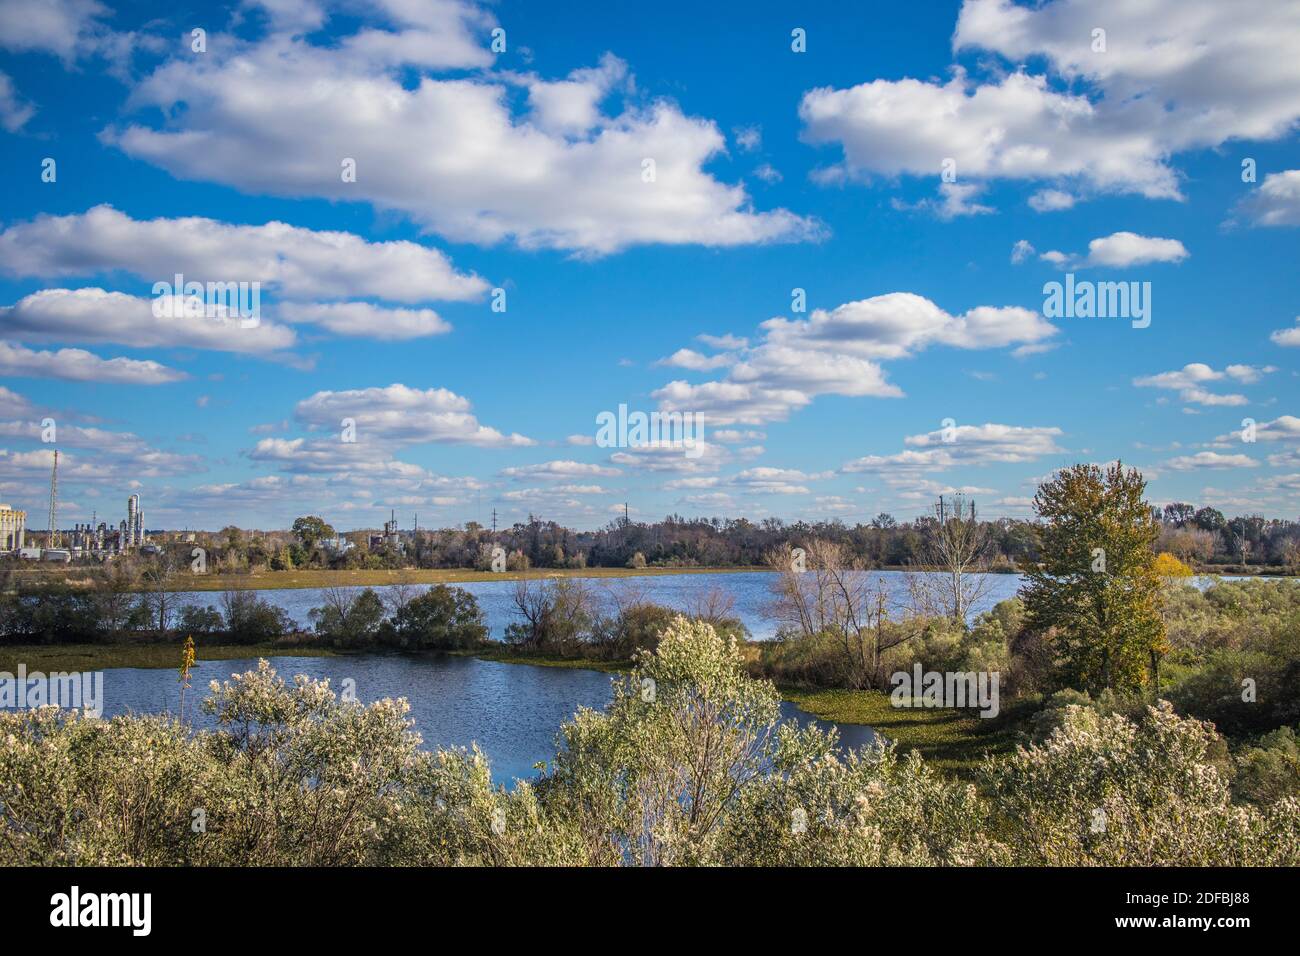 Swamp and an industrial plant in the distance with blue skies Stock Photo